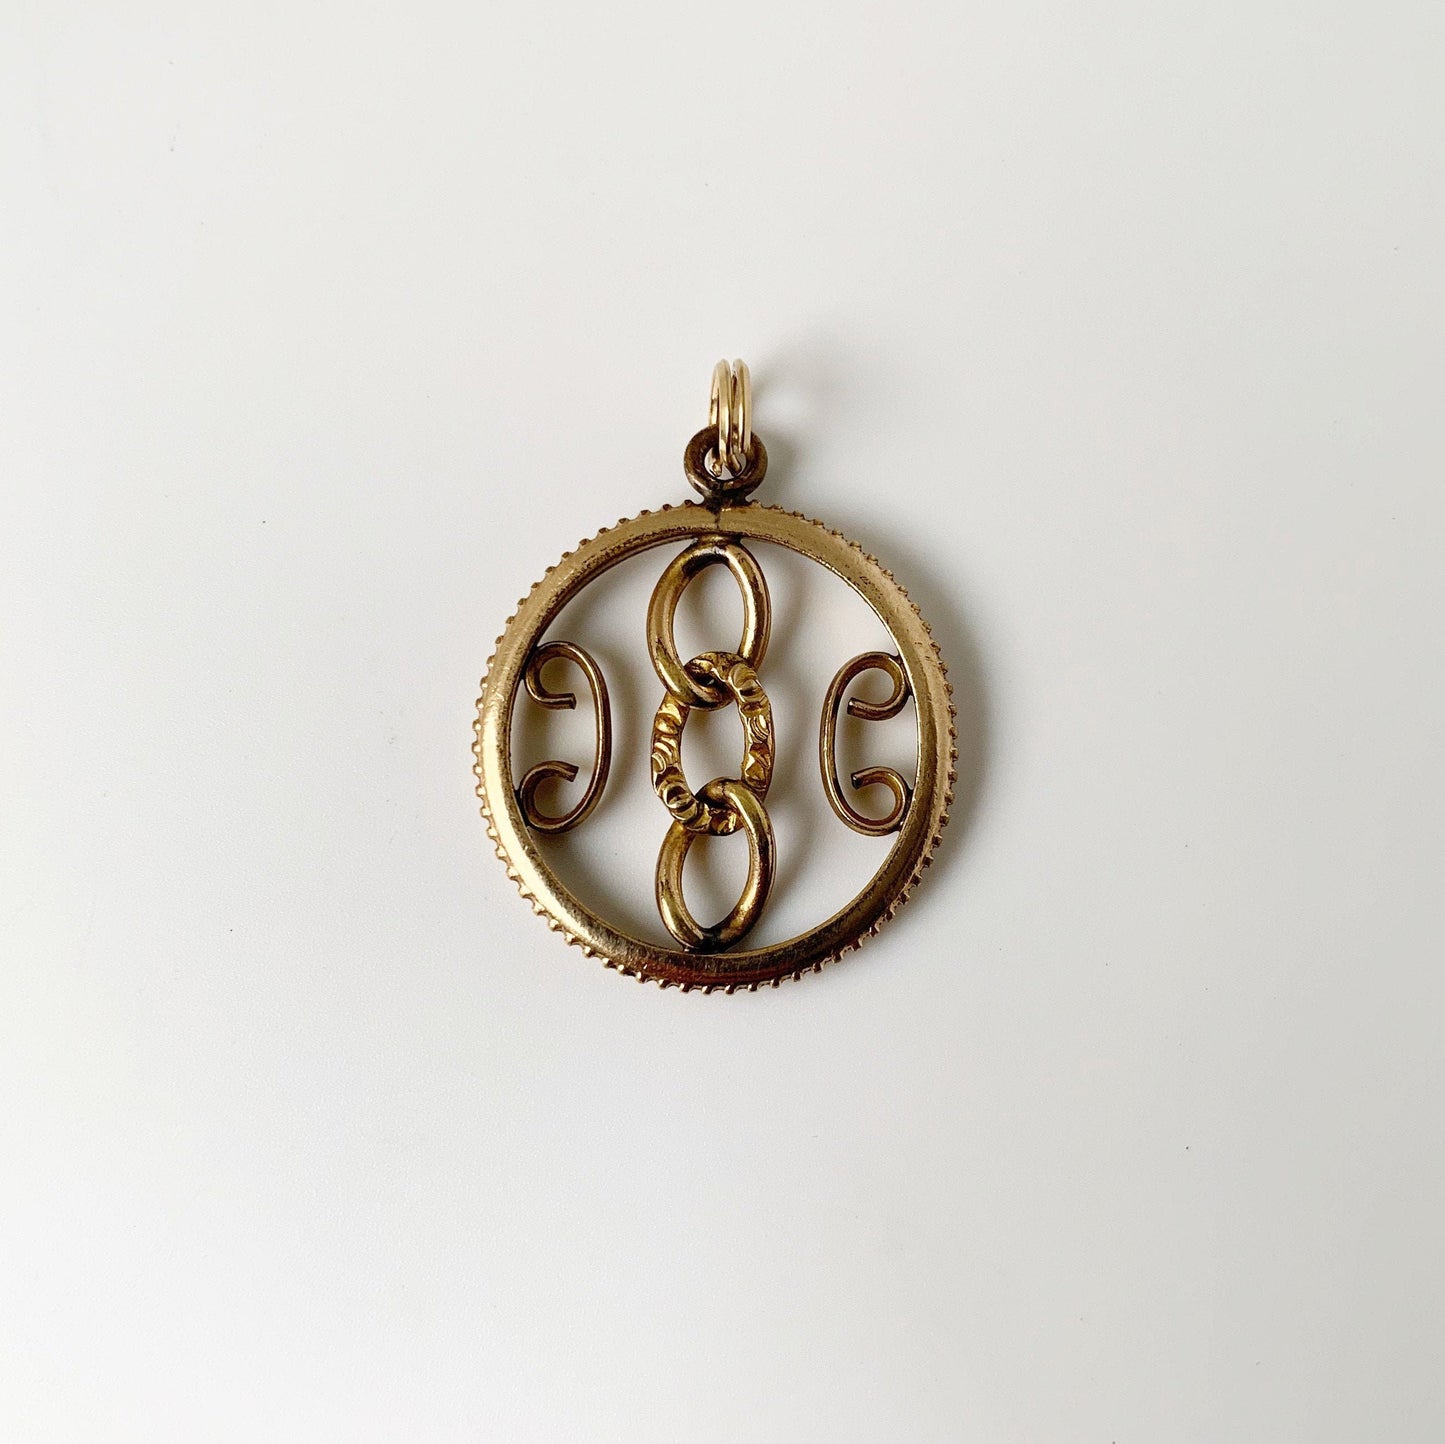 Victorian Scrollwork Watch Fob Pendant | Linked Chain Watch Fob Medallion